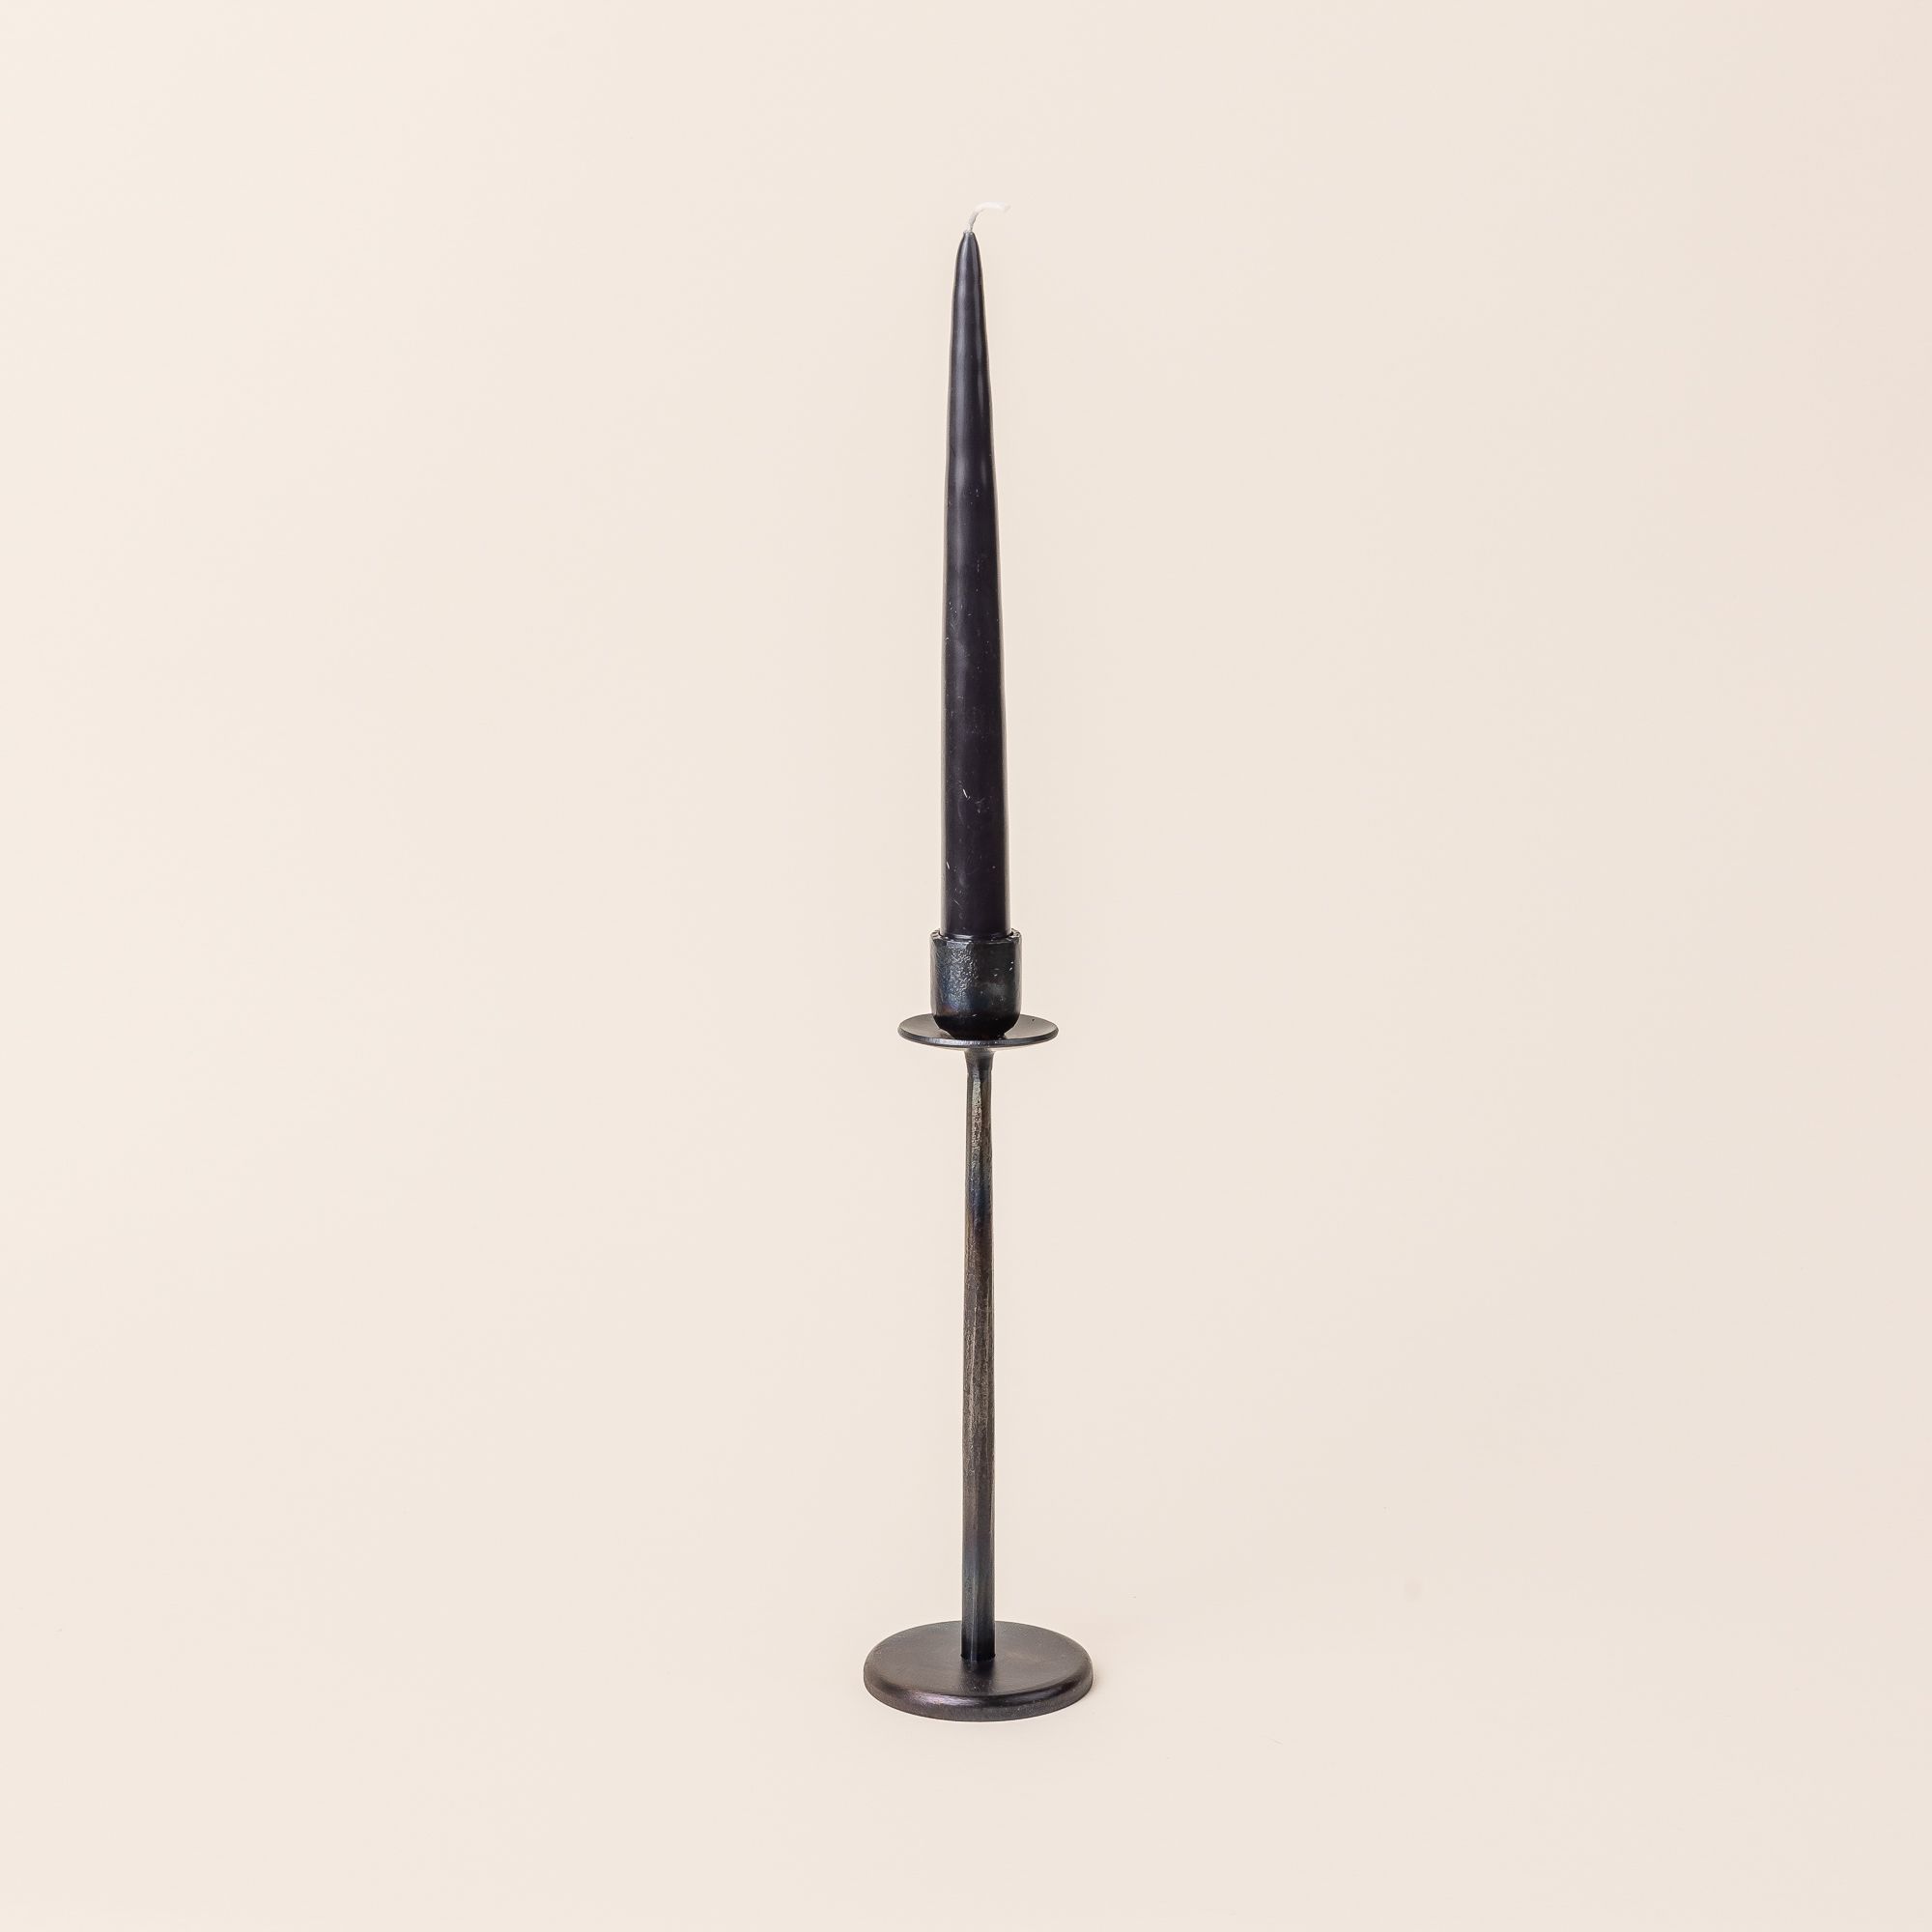 A black taper candle sits on a tall narrow iron candlestick holder. The holder has with a flat circle base and topped with a vessel to hold a taper candle.